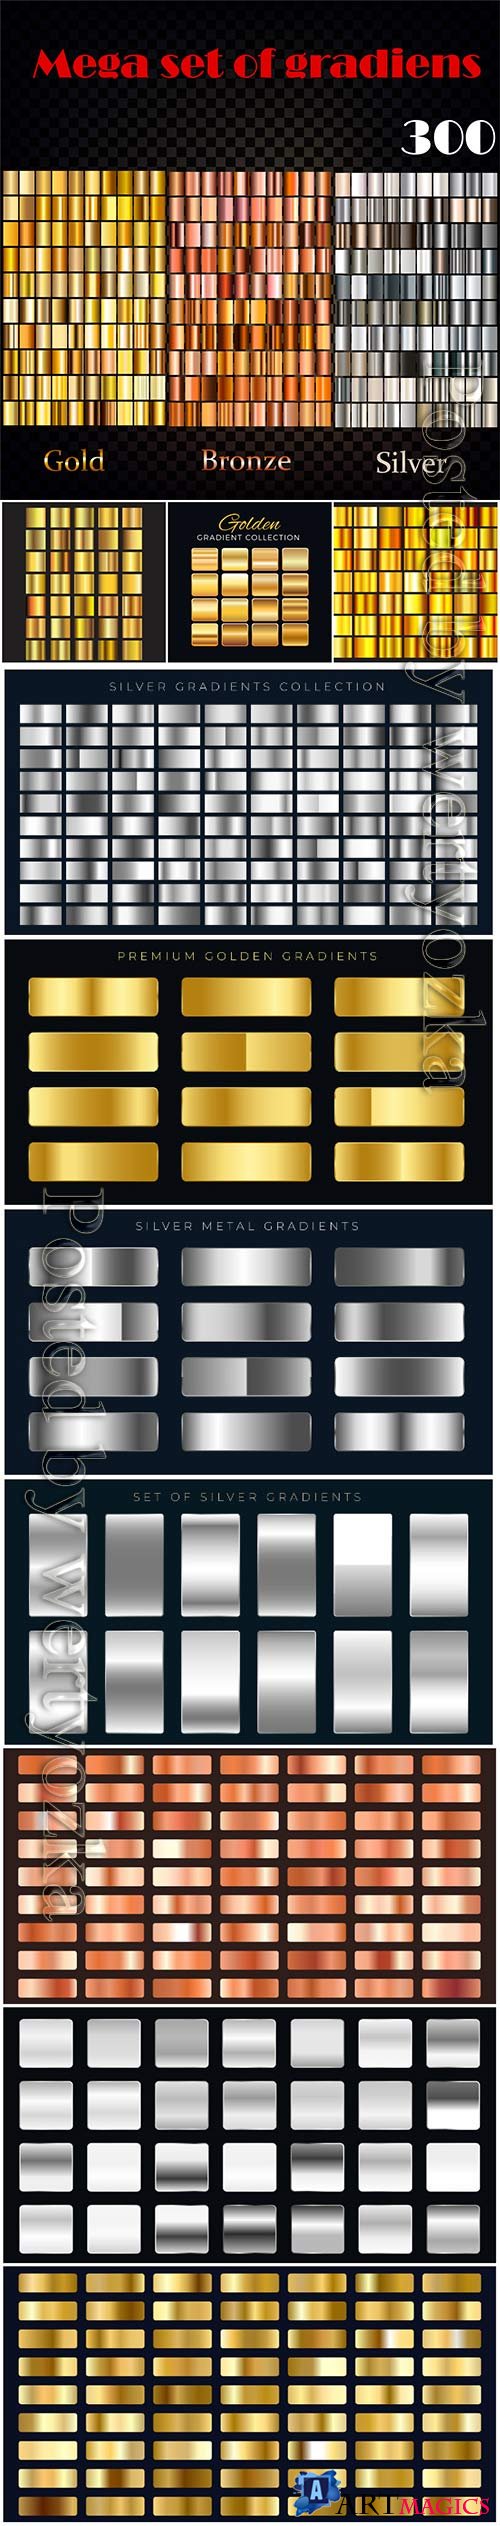 Big set of silver or gold gradients